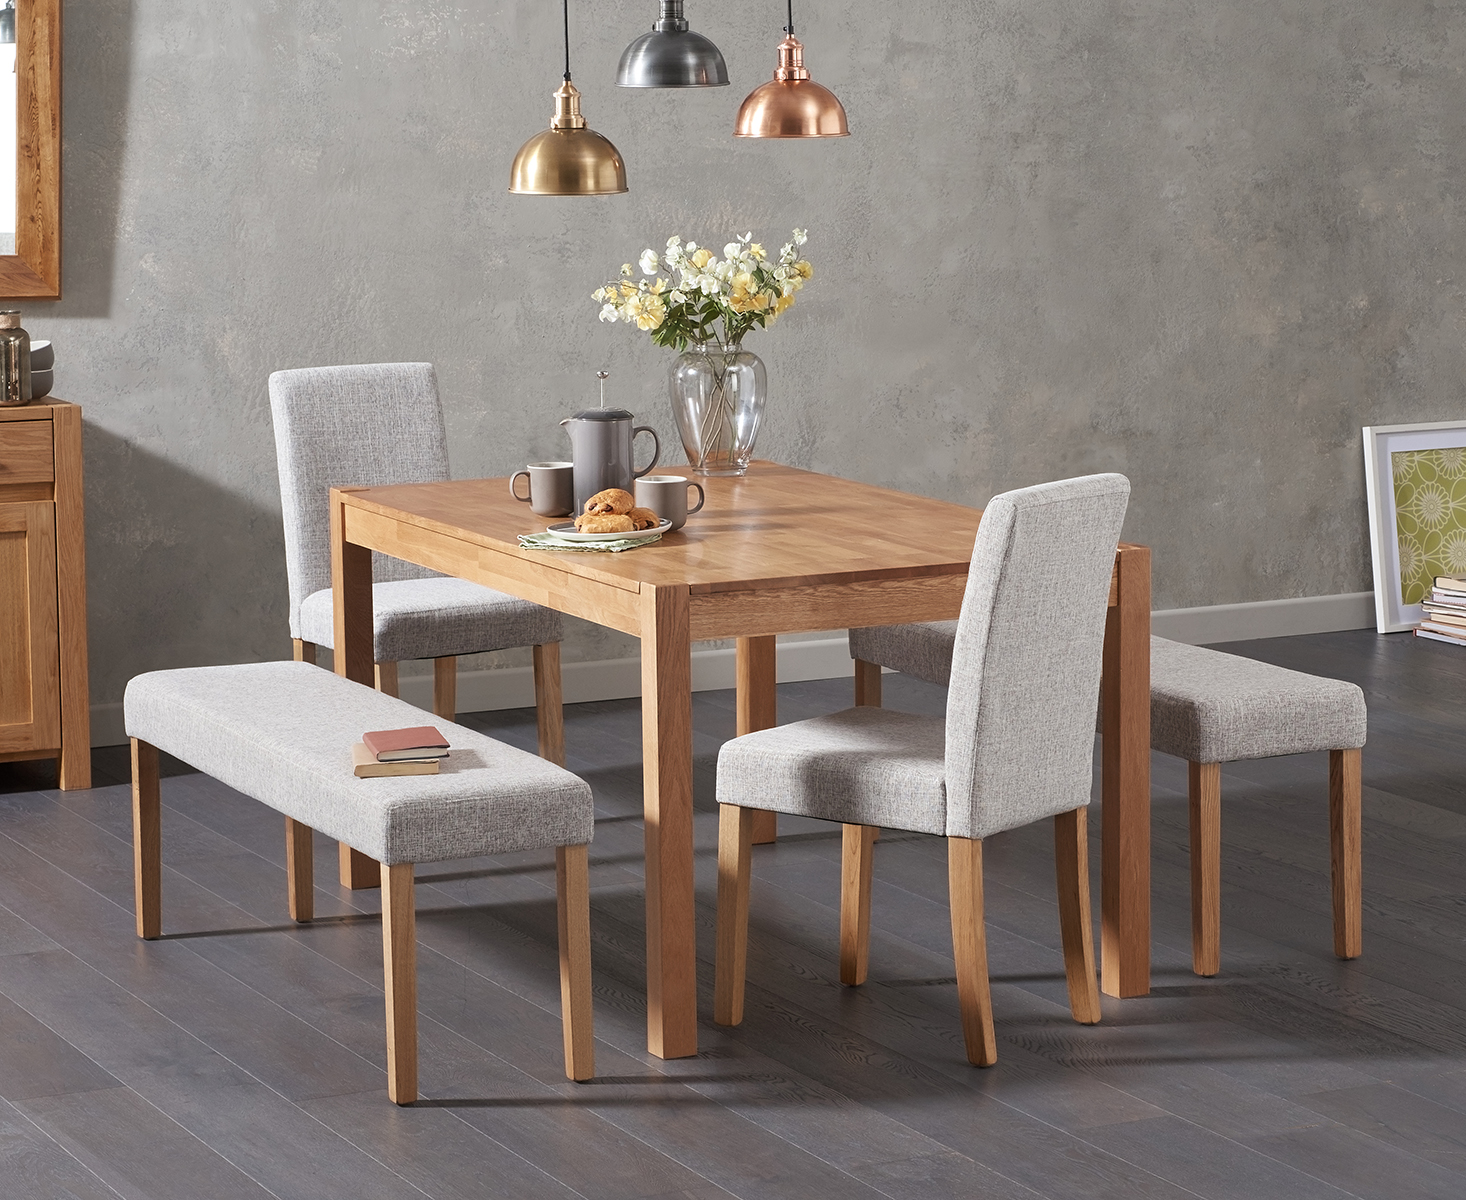 Oxford 150cm Solid Oak Dining Table Lila Large Grey Benches And Lila Chairs